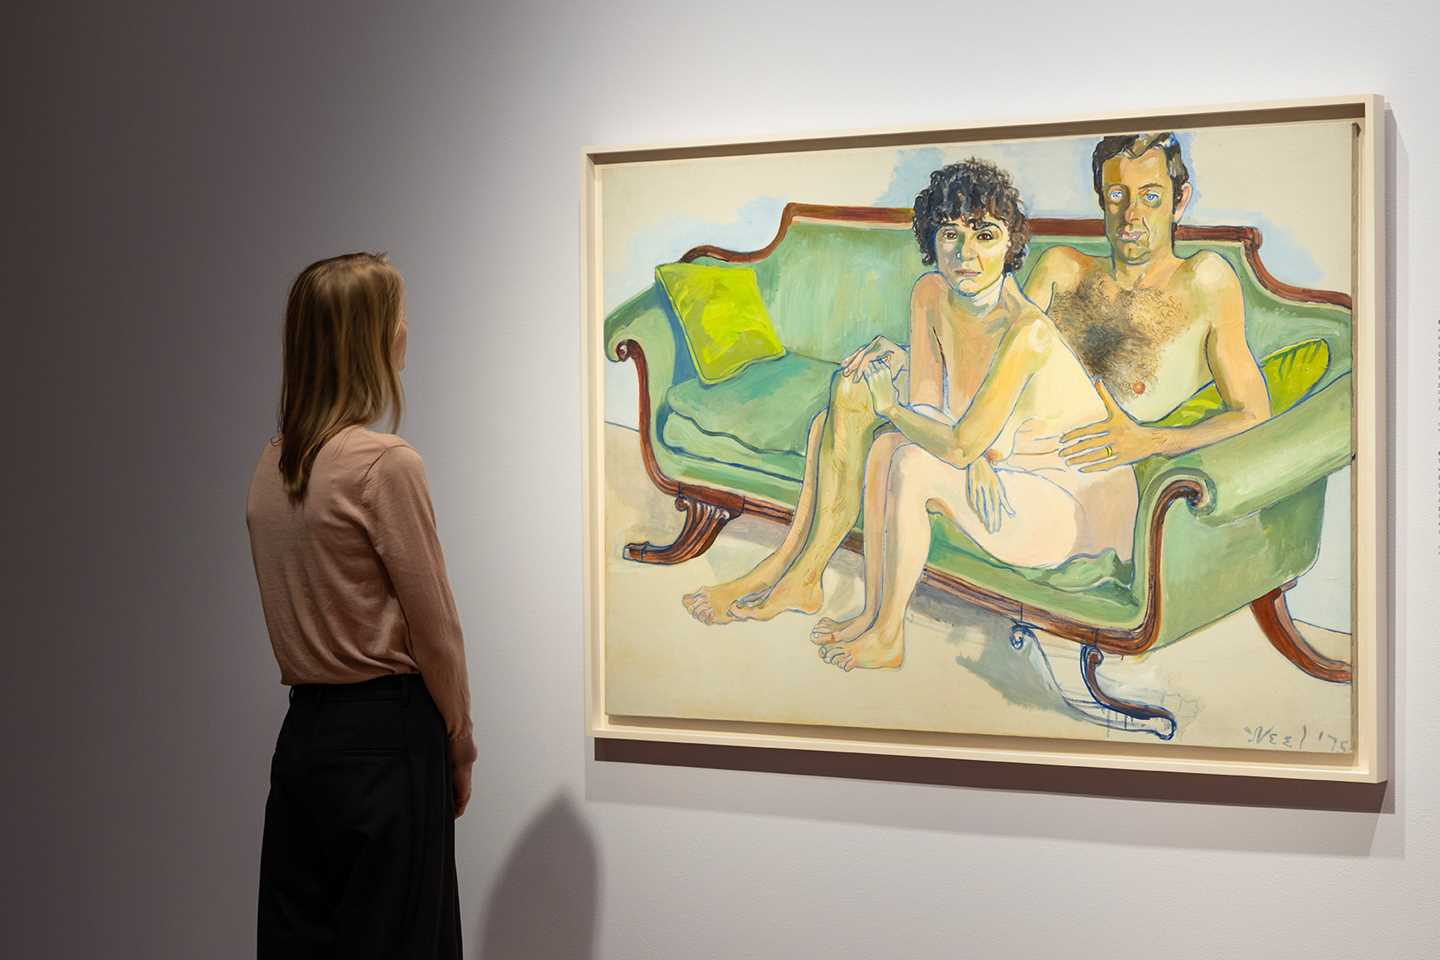 Installation view of the exhibition "Alice Neel: Every Person is a New Universe". Photo: Munchmuseet